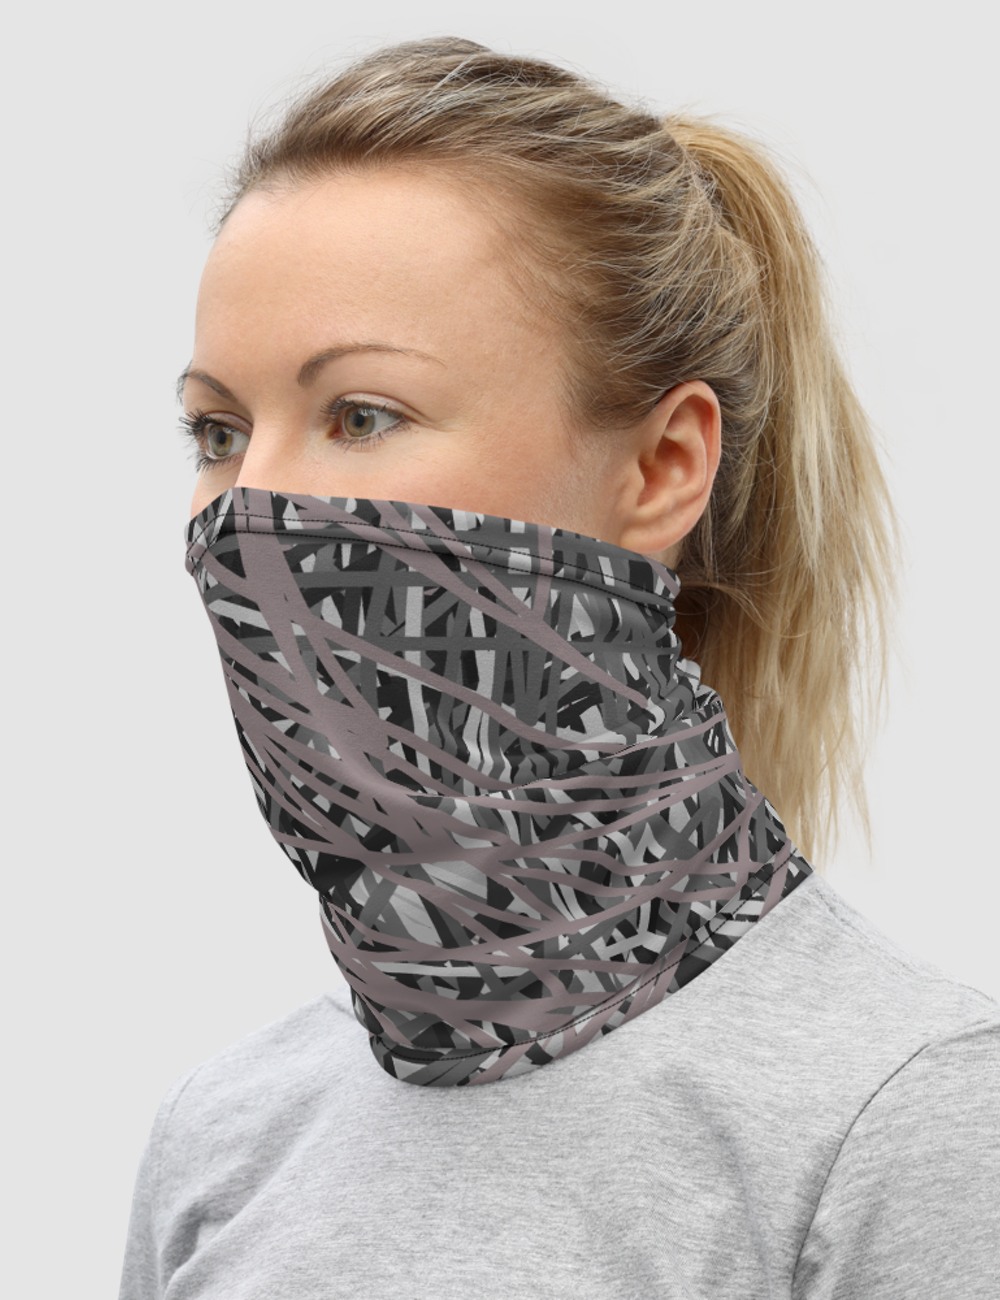 Abstract Lines Camouflage | Neck Gaiter Face Mask OniTakai